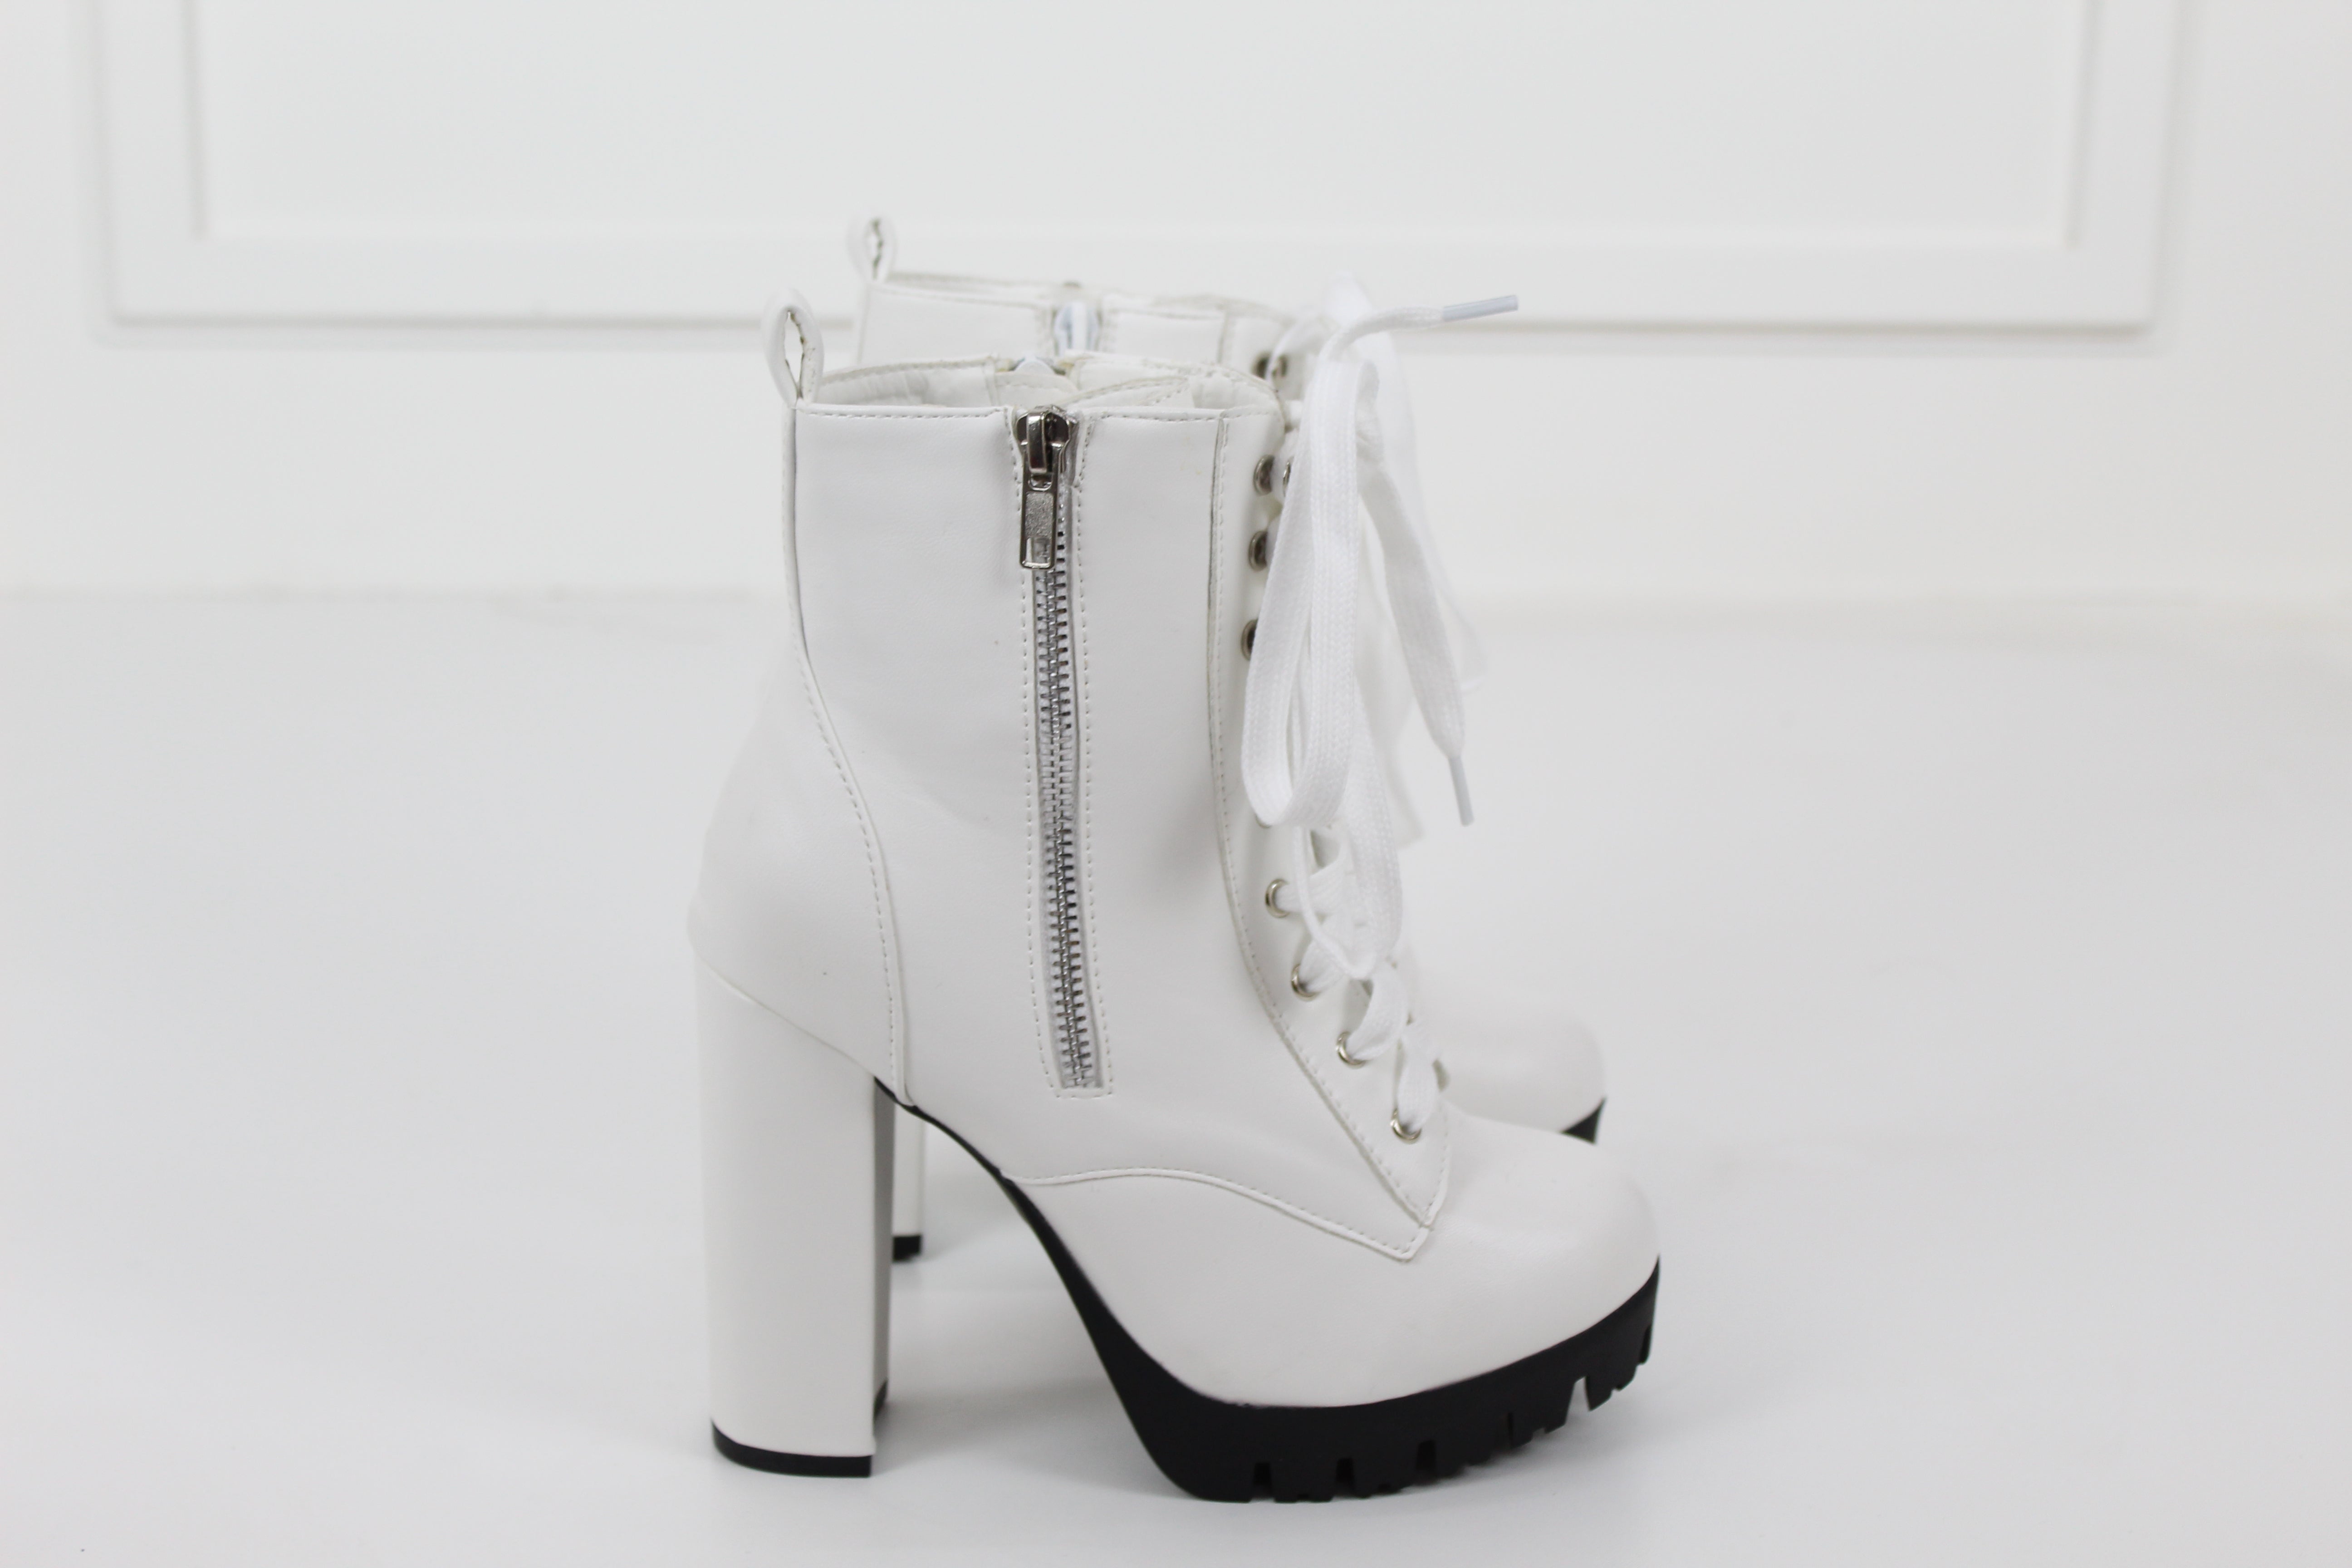 White lace up 11cm heel cleated sole ankle boot veronica